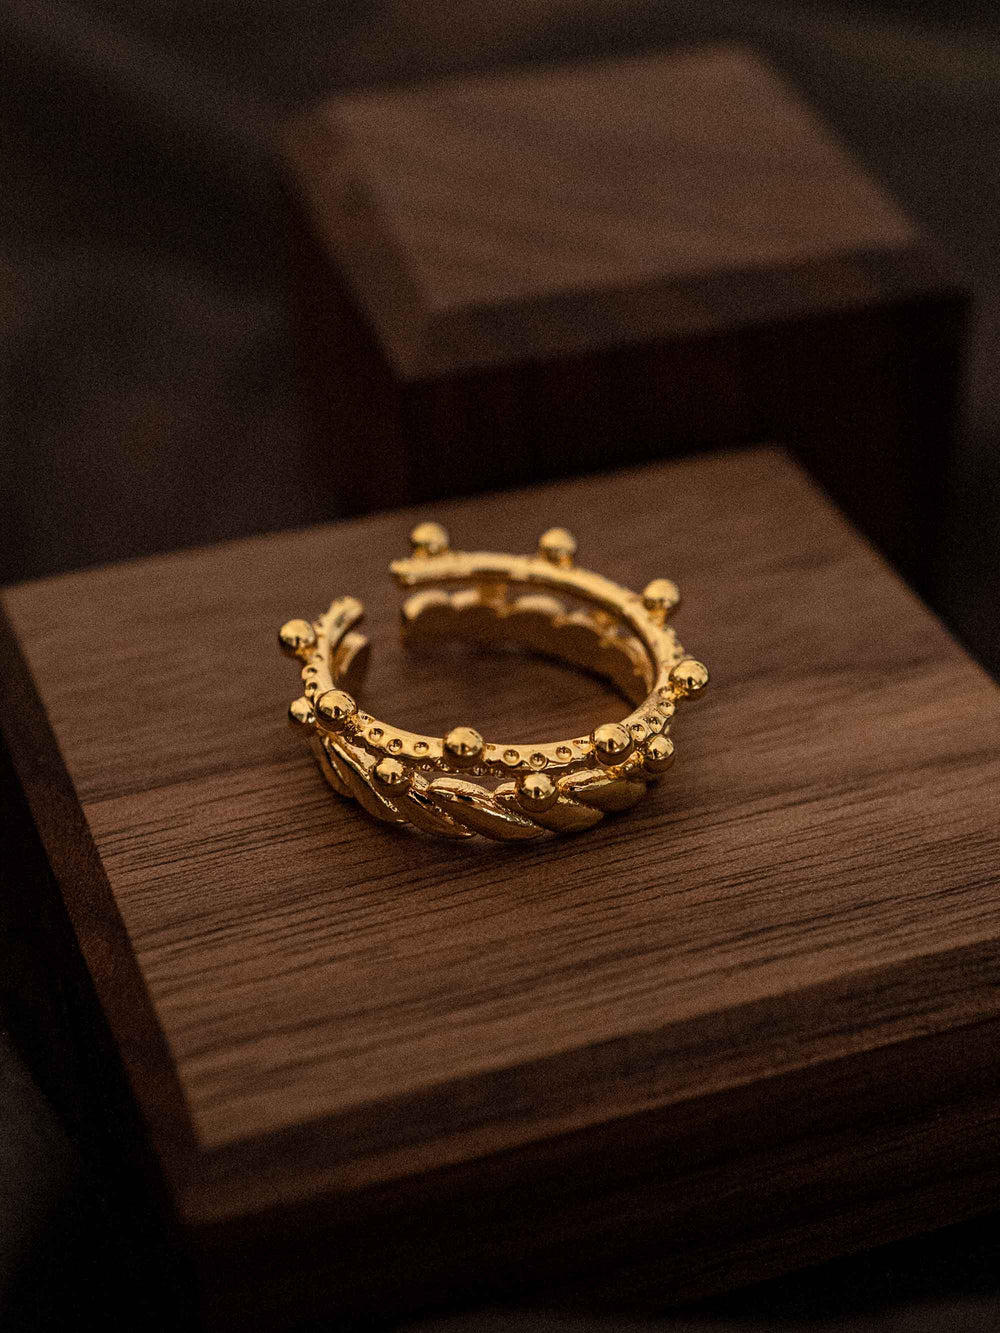 One gold crown shaped ring